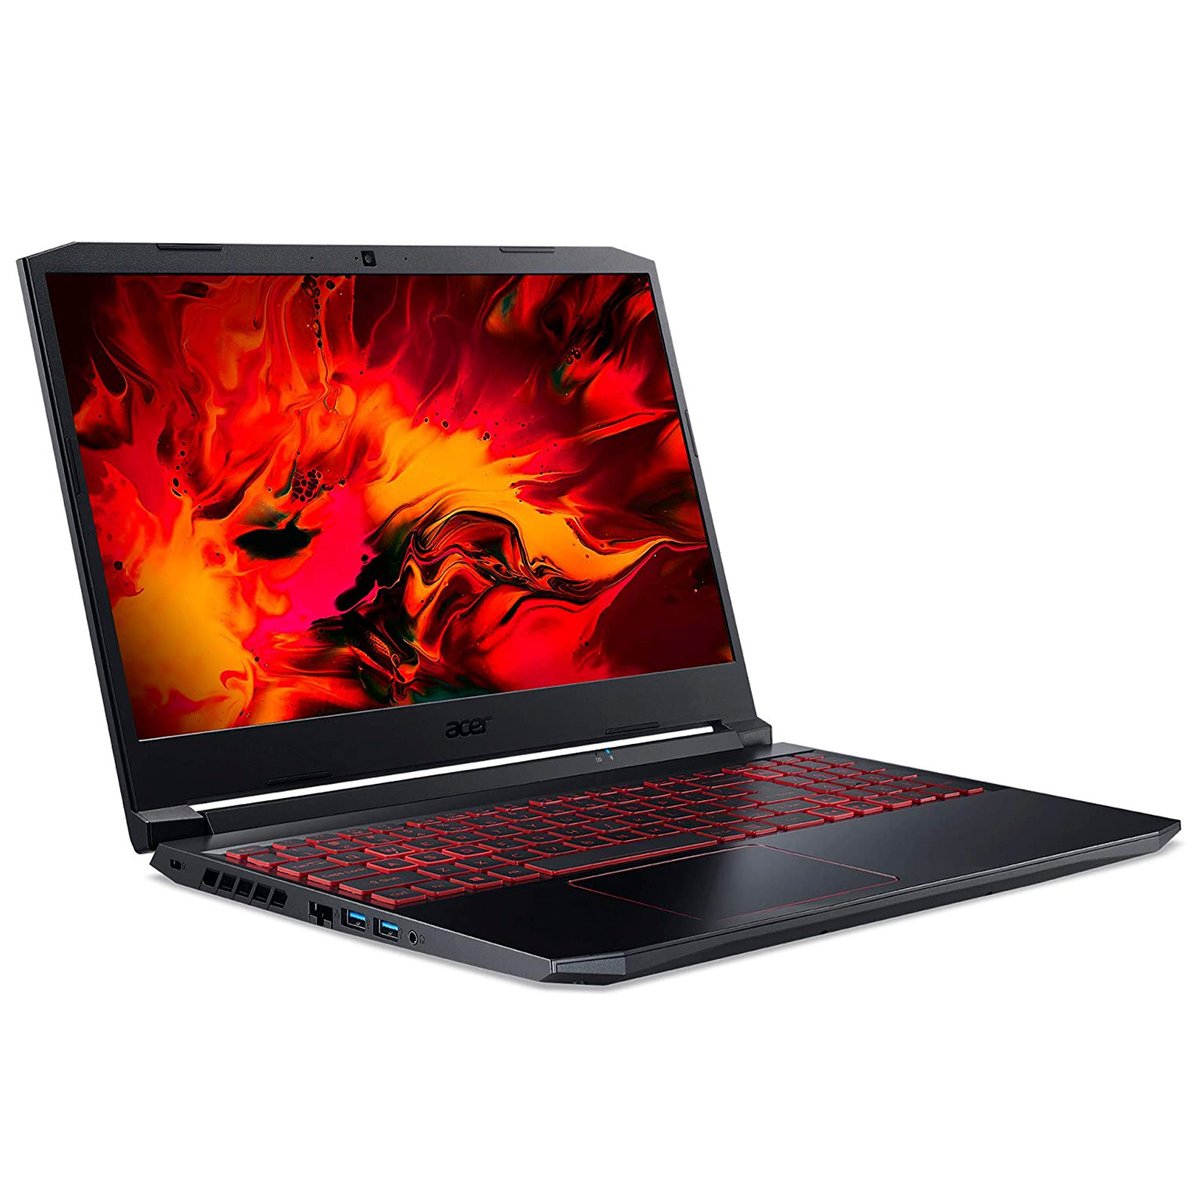 Acer Nitro5 AN515-55 Gaming Notebook,Core i5-10300H,8GB, 1TB SSD,4GB Graphics, 15.6" FHD,Black